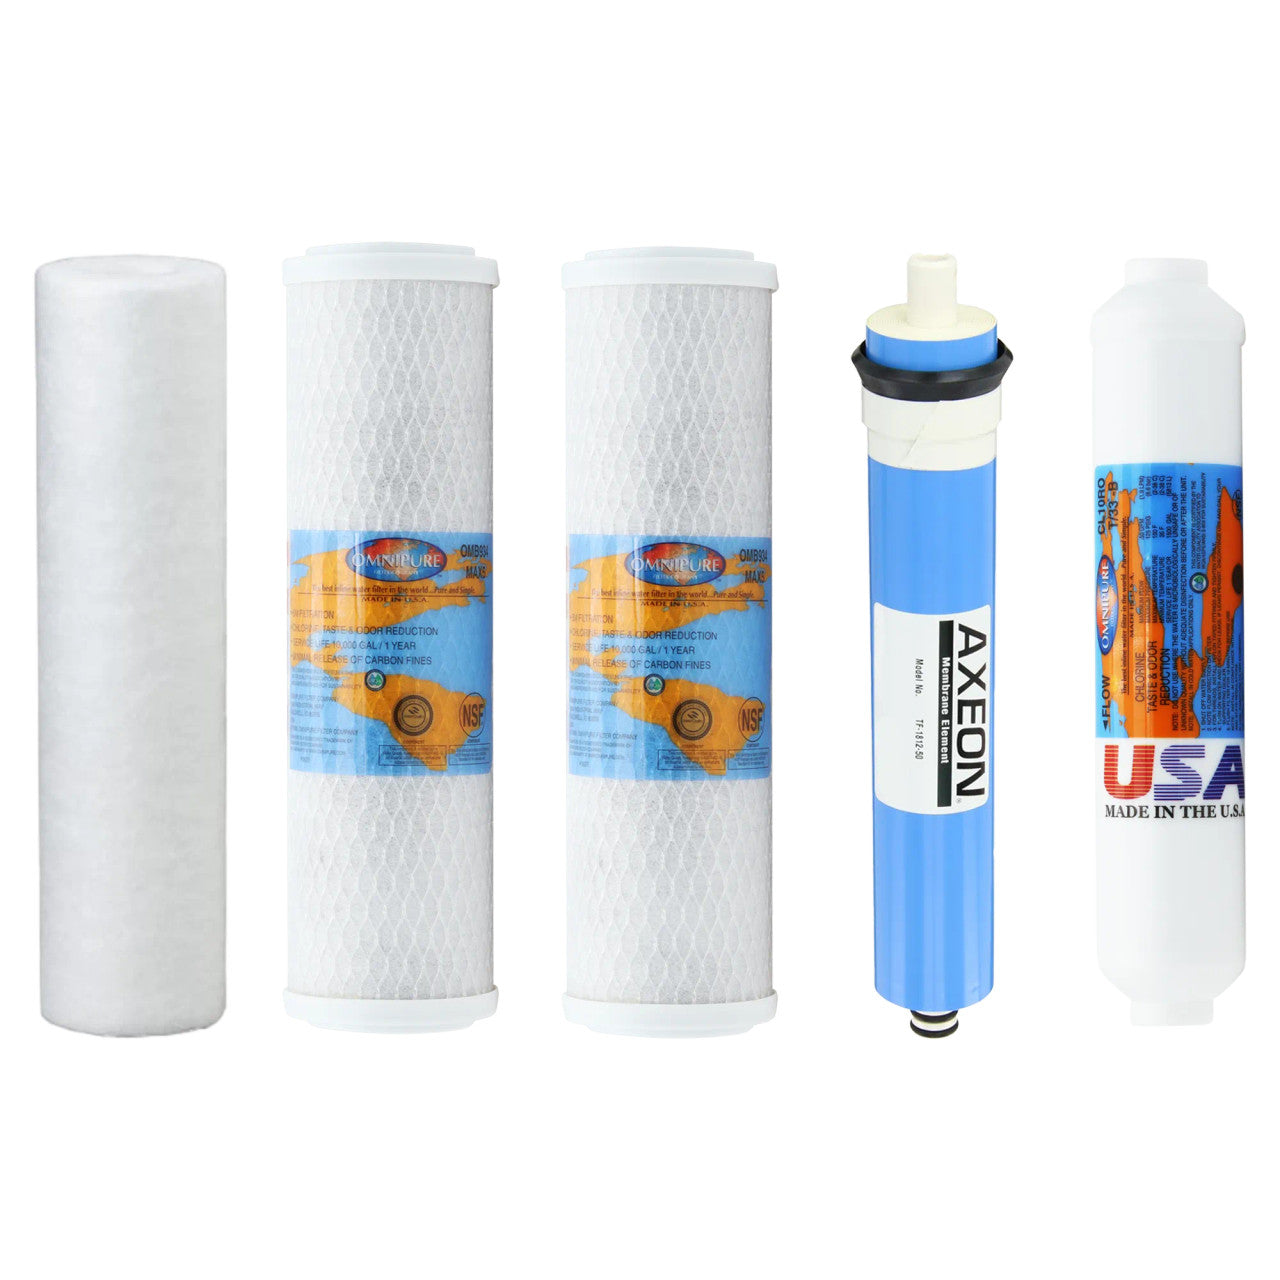 Proline Plus Compatible RO Filter Replacement Kit with Membrane, Reverse Osmosis Drinking Water Change Bundle YSM-PROPLUS